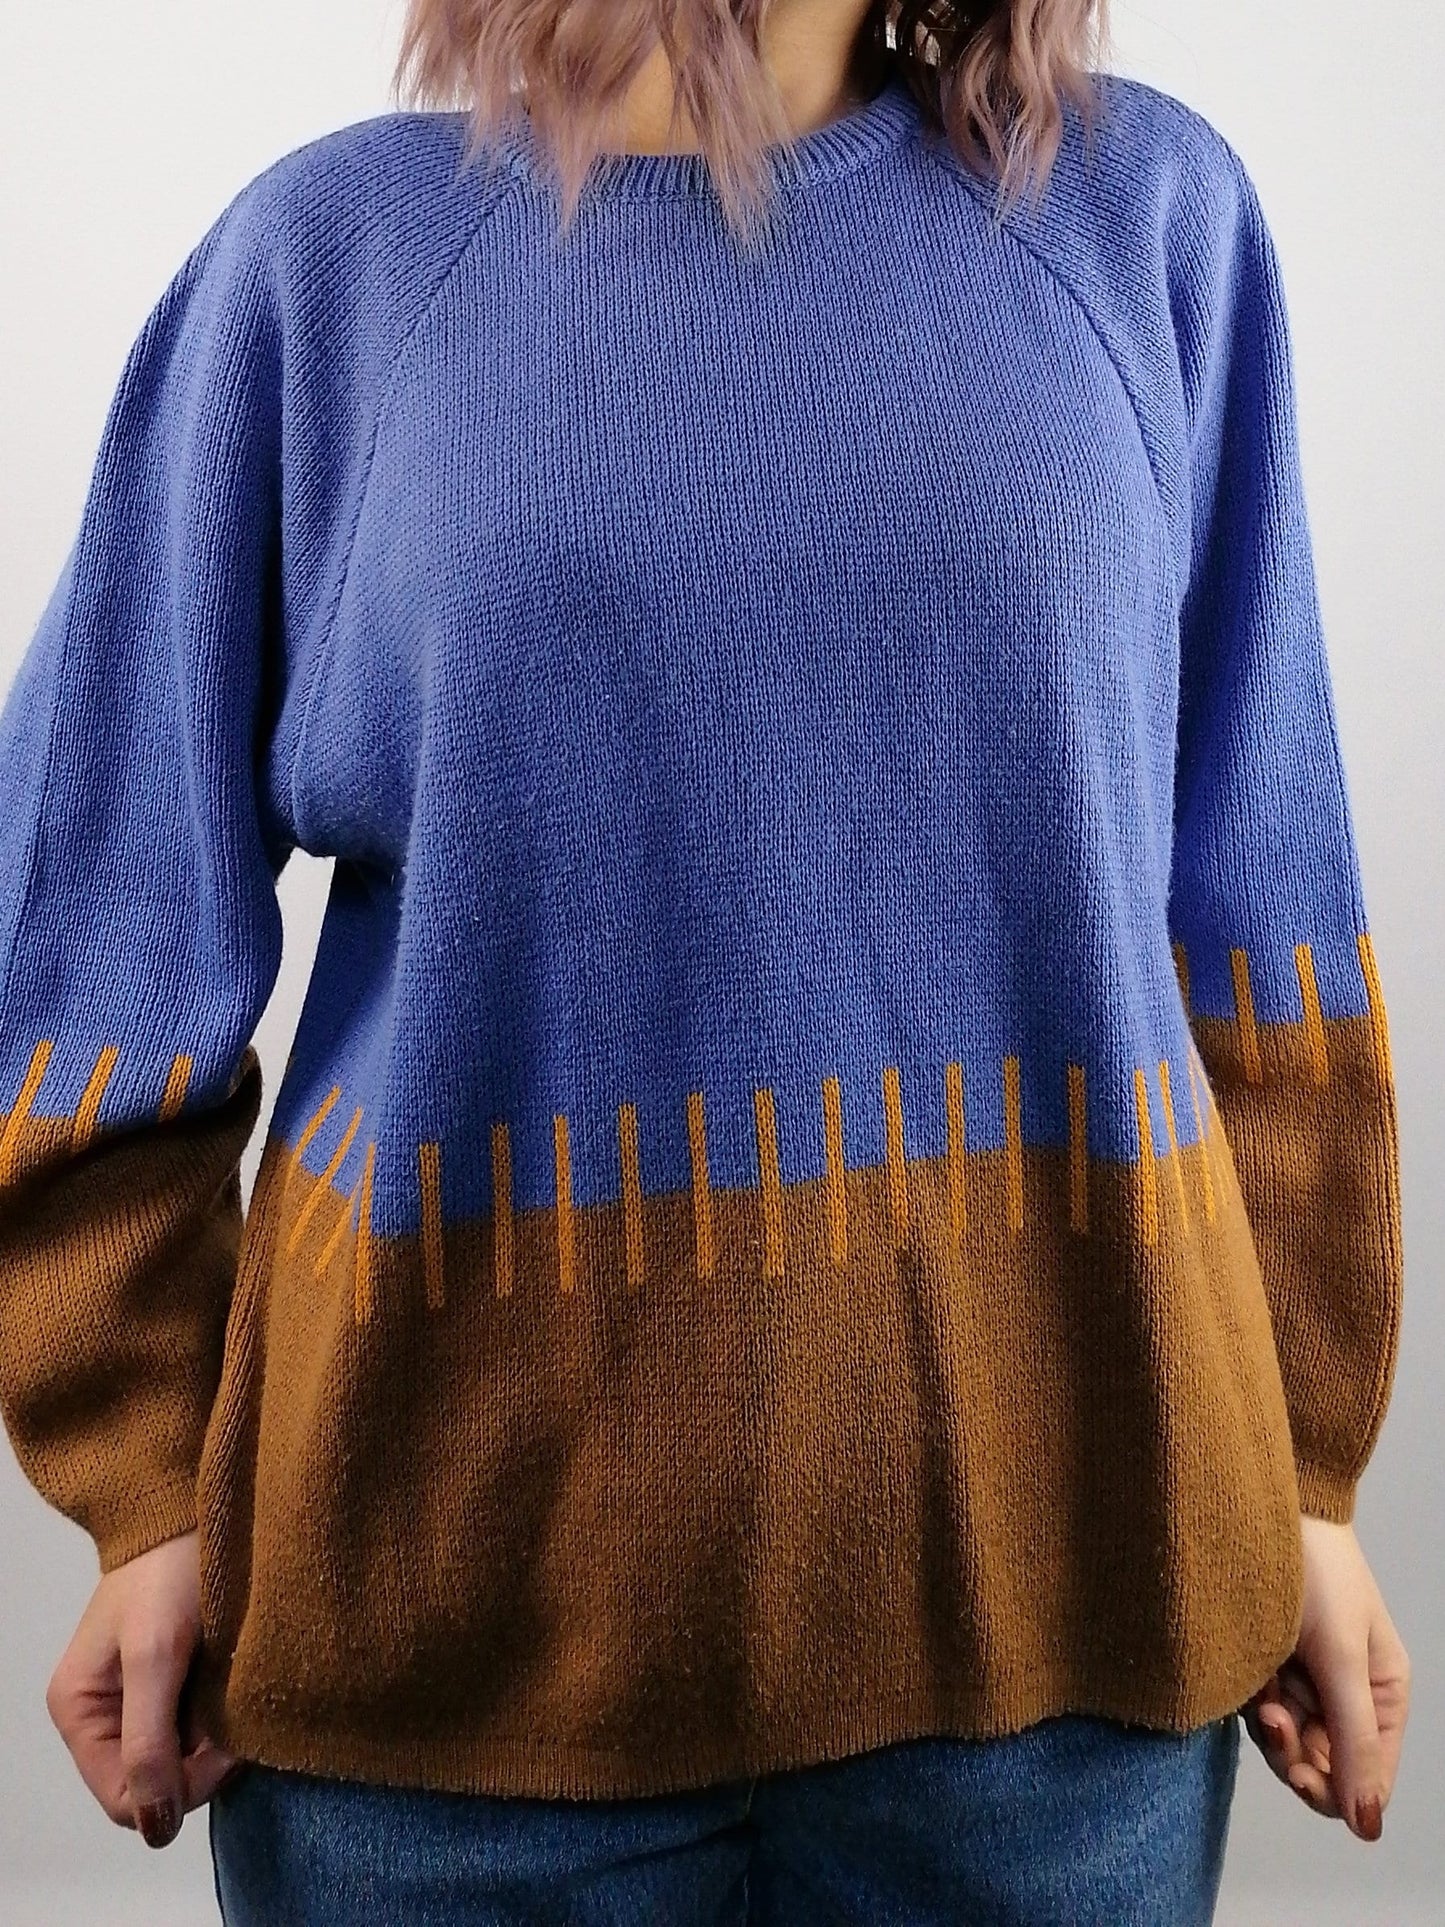 Graphic Pattern Knit Sweater Blue and Burnt Orange - size S-M